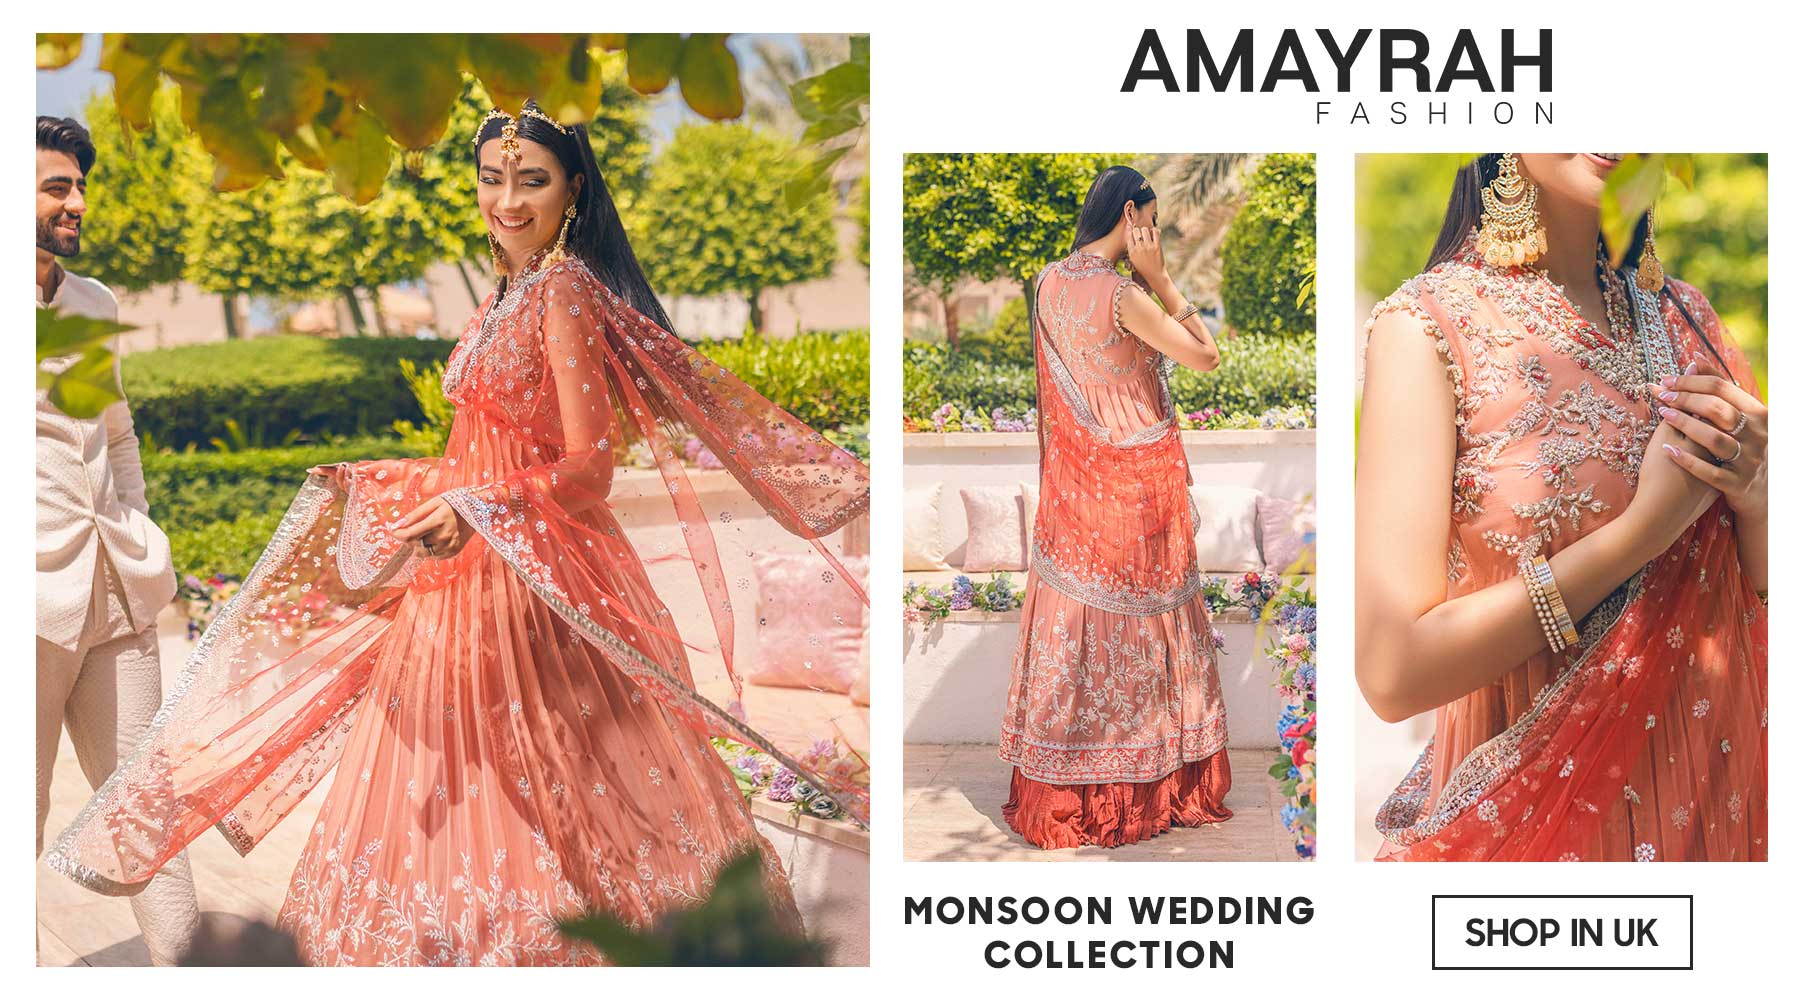 Introducing Monsoon Wedding Collection: A Fusion of Artistry and Opulence